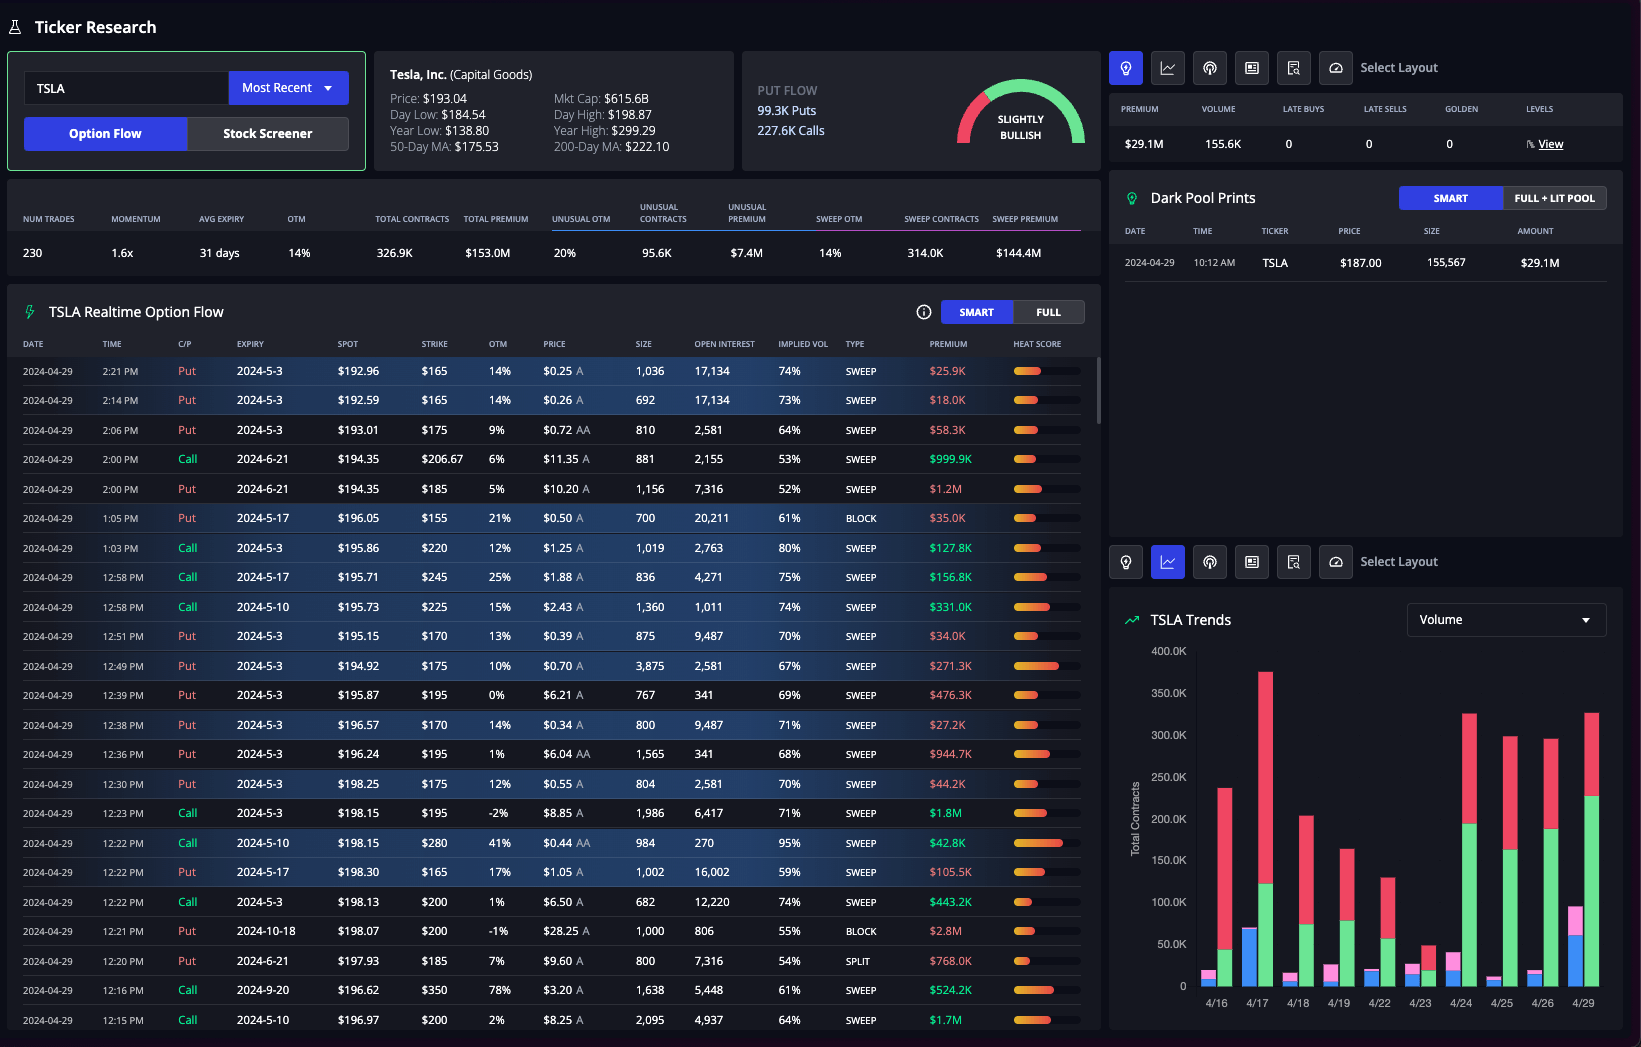 Tesla Ticker Research page showing real-time options flow, dark pool, news, and market analysis